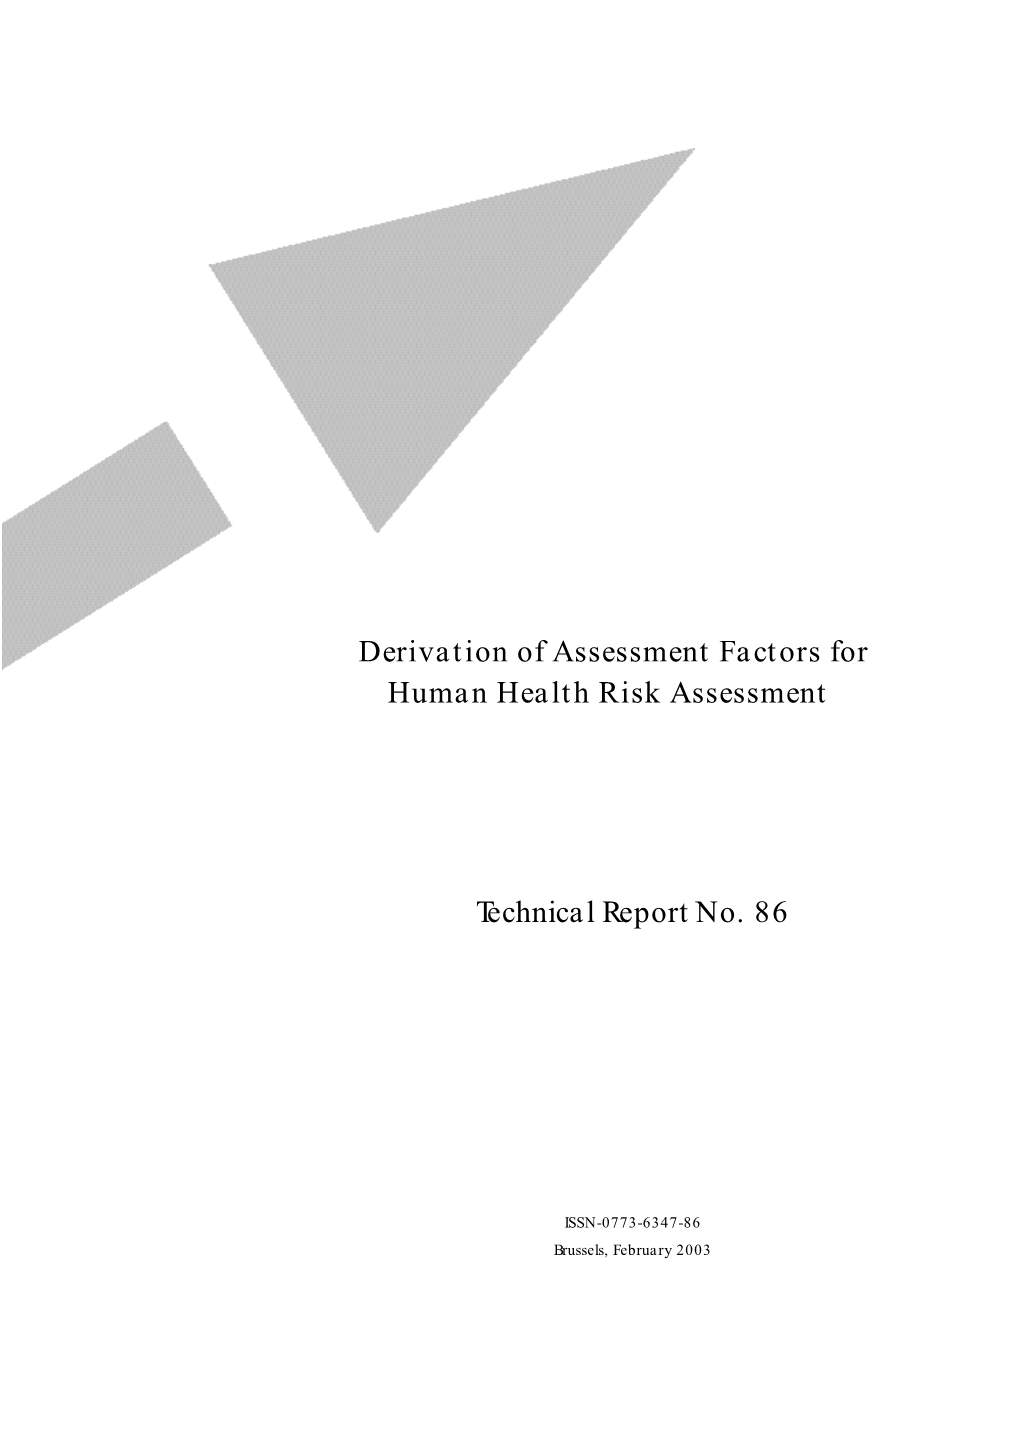 Technical Report No. 86 Derivation of Assessment Factors for Human